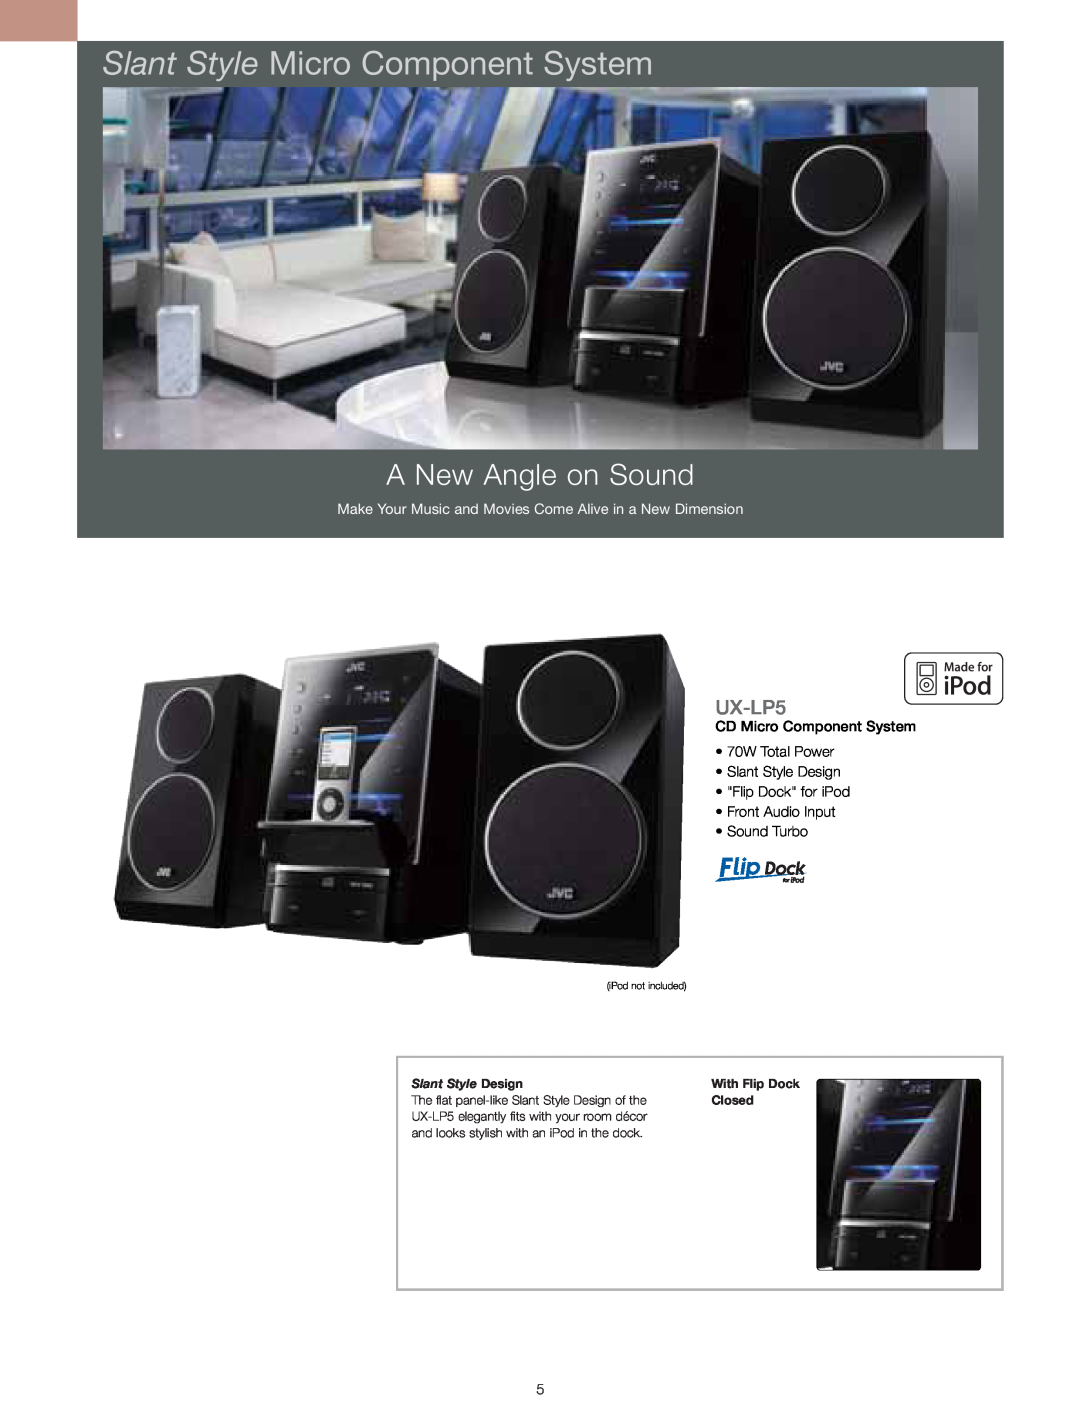 JVC HARX300 Slant Style Micro Component System, A New Angle on Sound, UX-LP5, Slant Style Design, Closed, With Flip Dock 